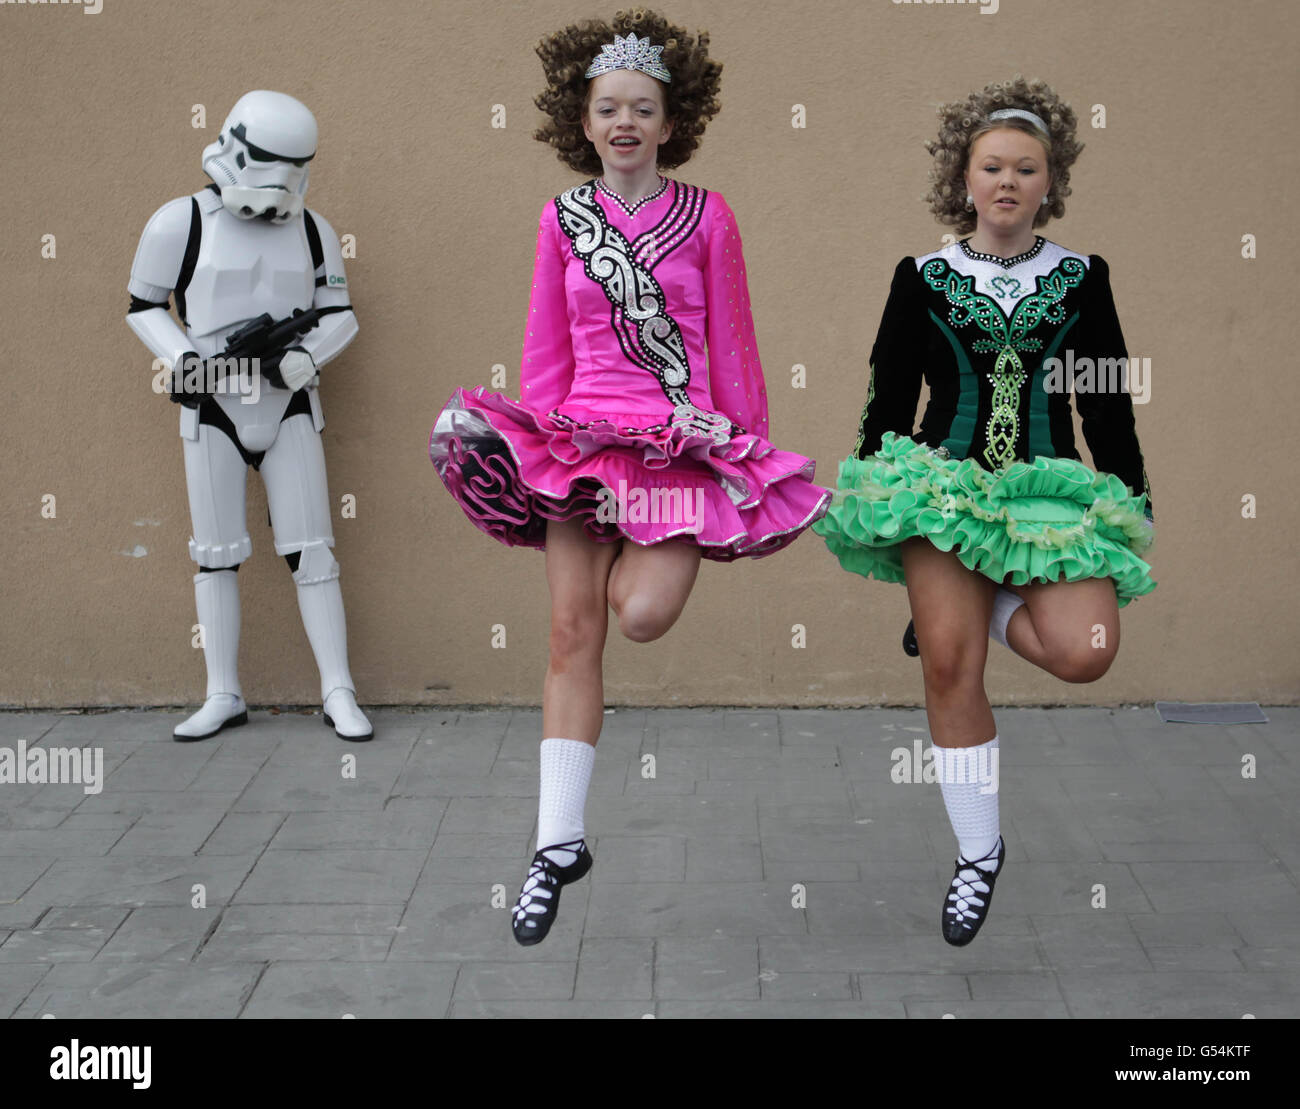 Sarah Duggan, 13, (left) and Shannon Tone, 14, practice Irish dancing beside a man dressed as a Storm Trooper from the Movie Star Wars, as they gather at the Citywest Convention in Dublin today, for The Invasion Dublin Star Wars Convention and the Irish Dancing Open Championships both taking place this weekend. Stock Photo